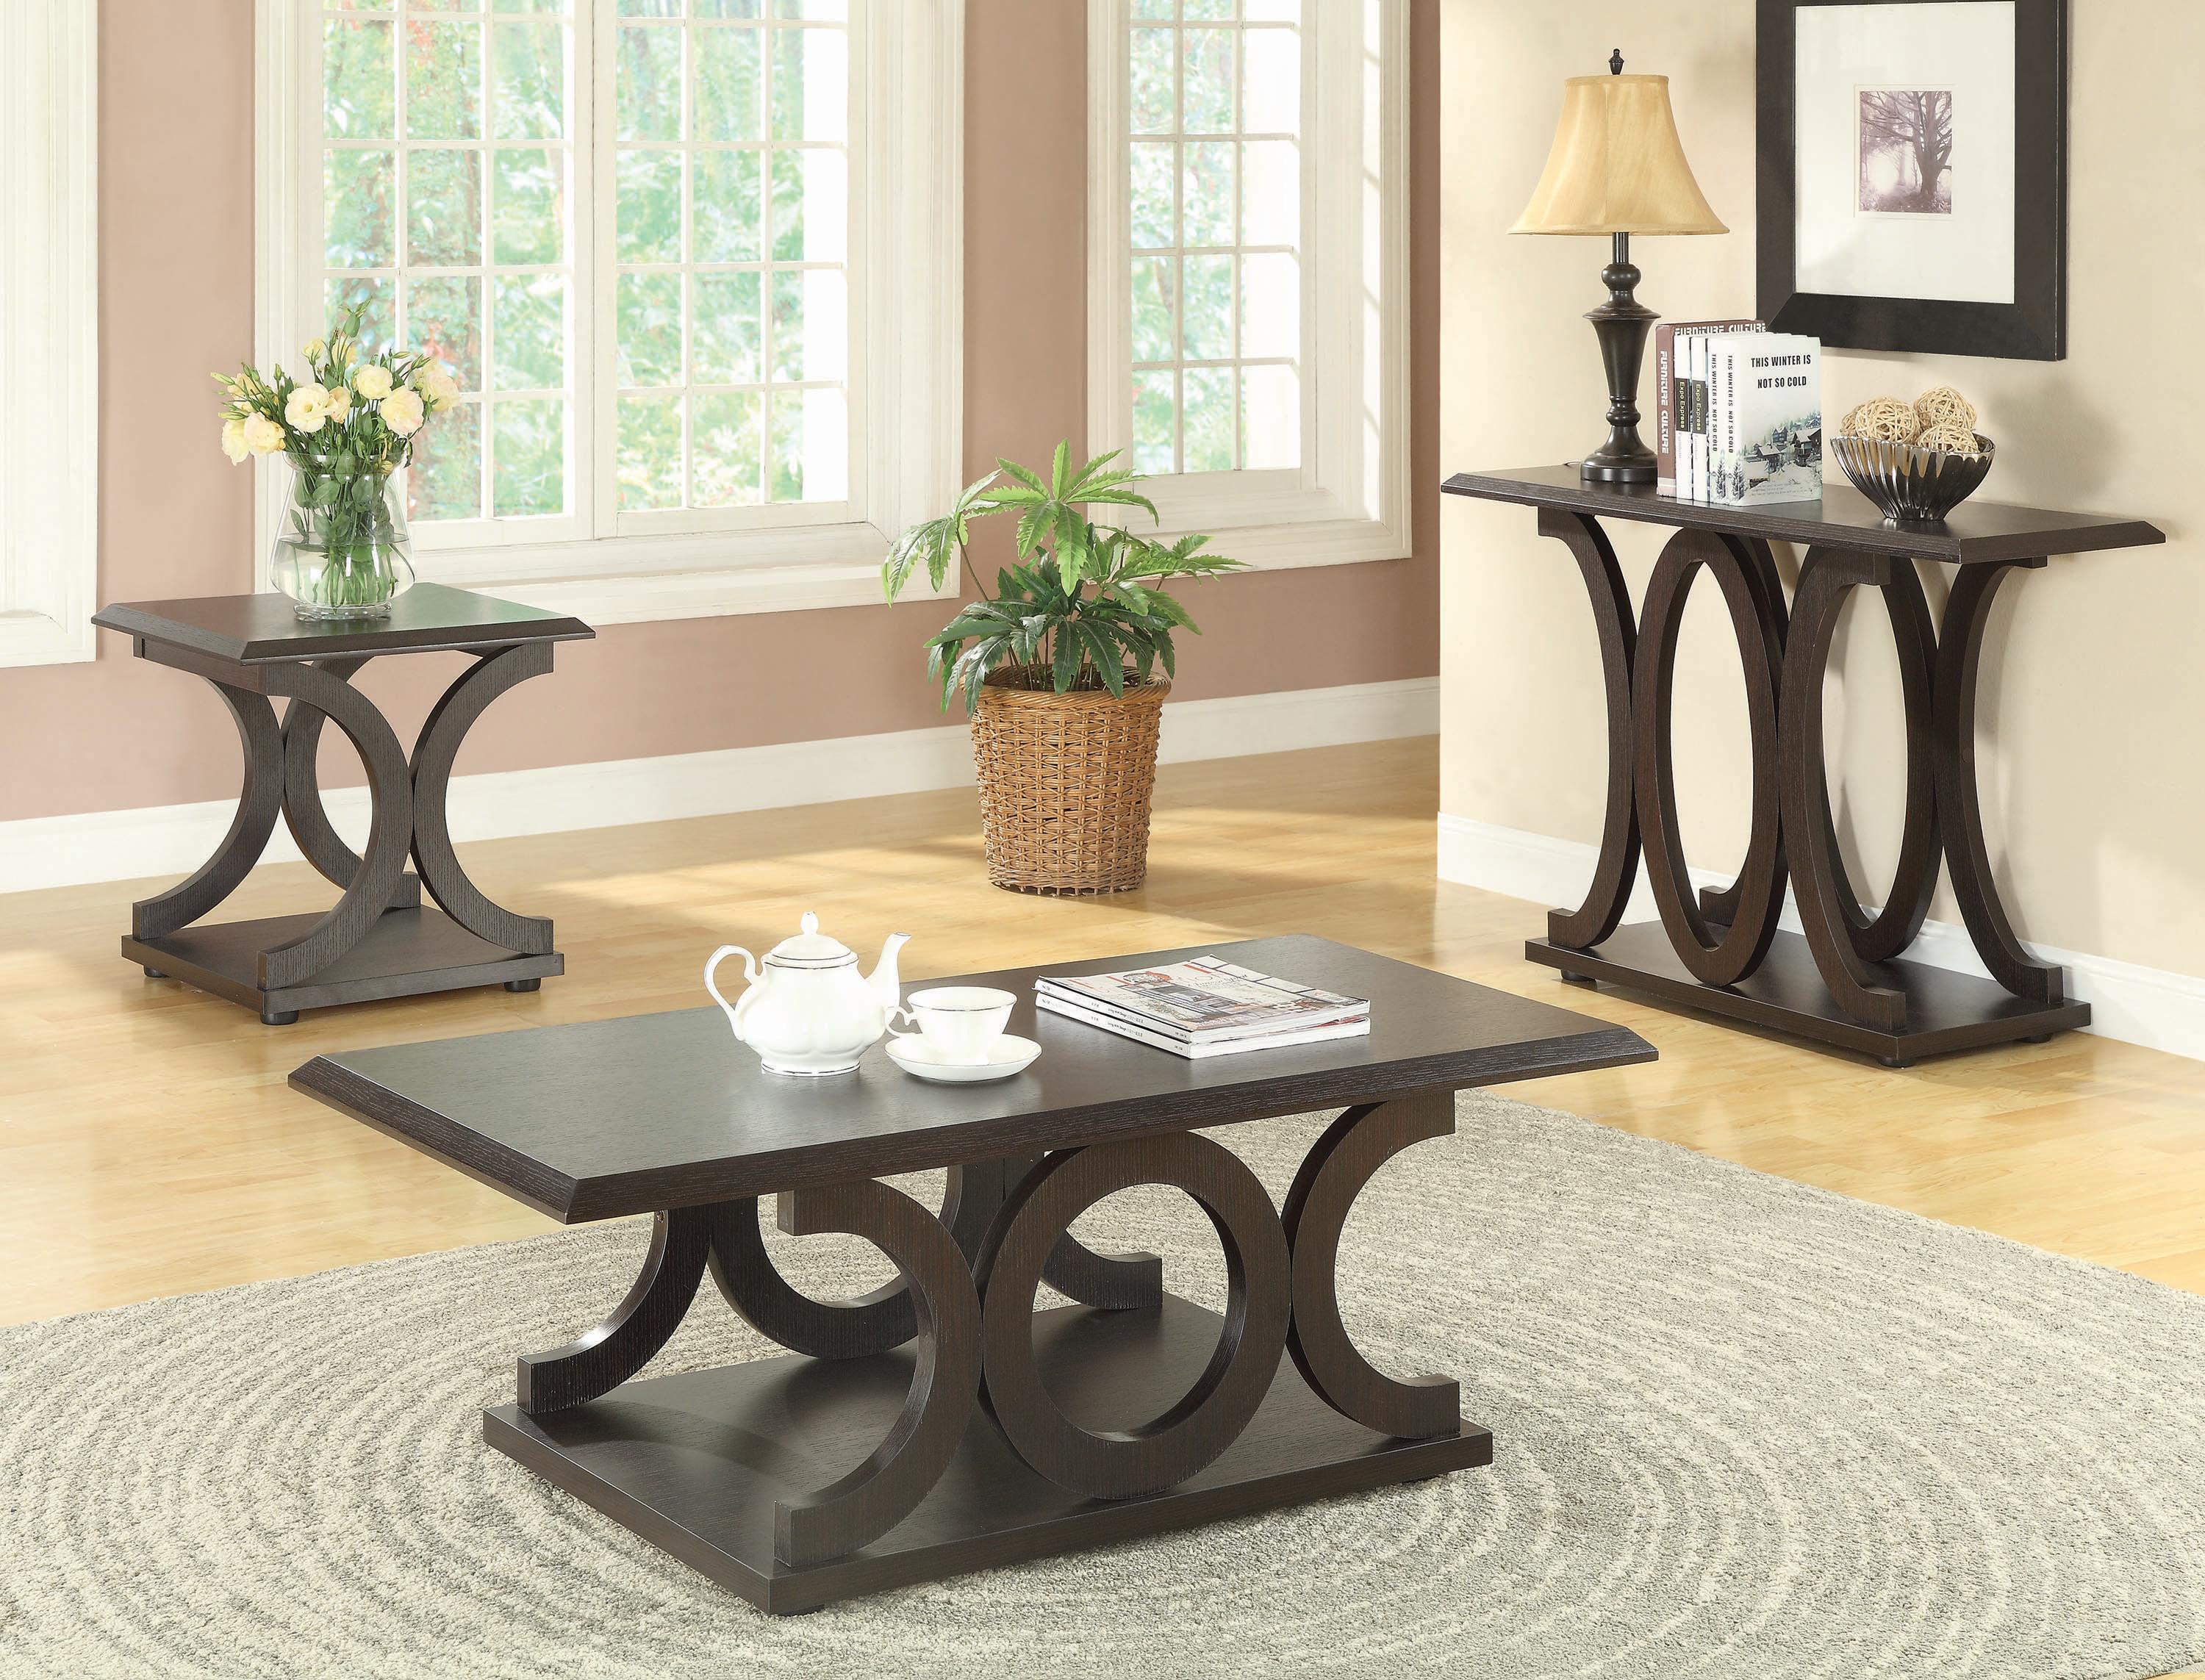 Transitional Coffee Table Set 703148-S3 703148-S3 in Cappuccino 